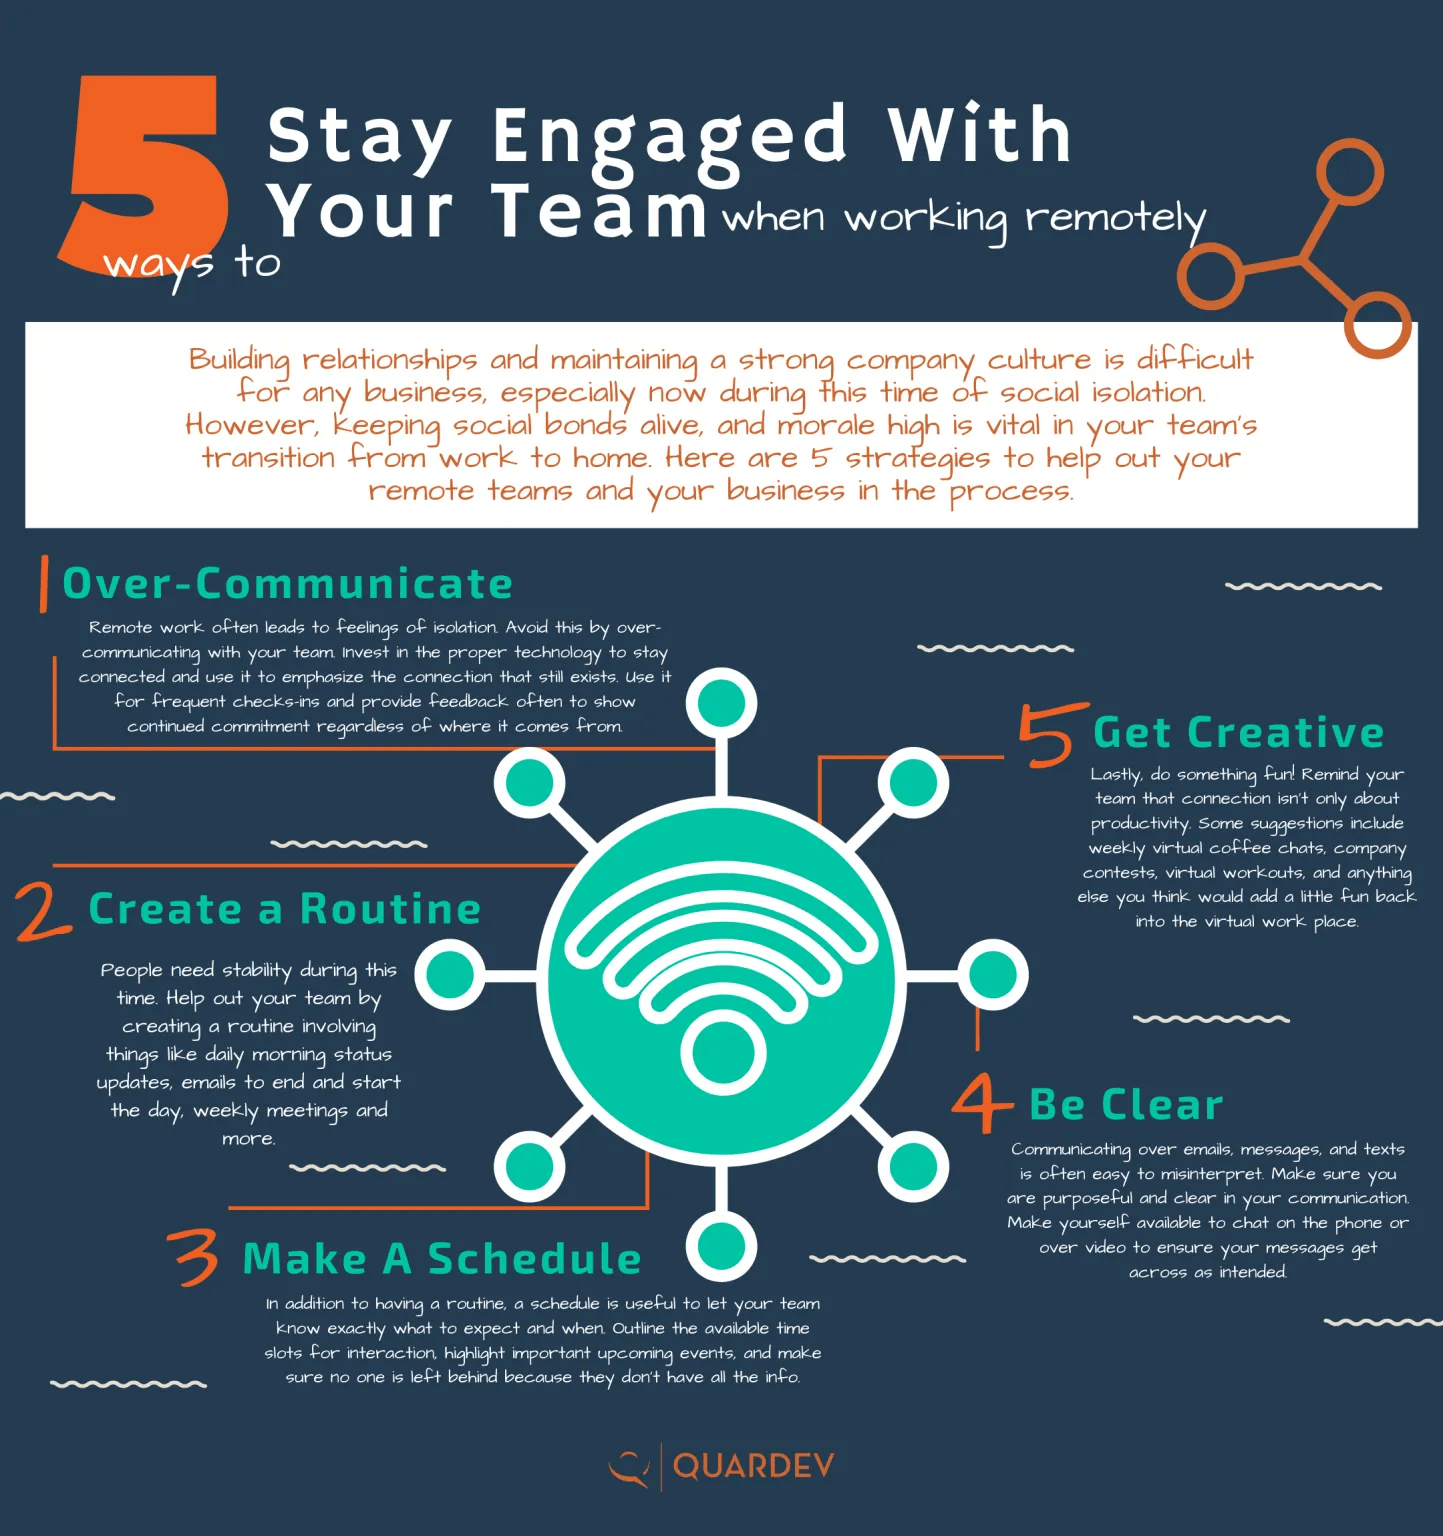 5 ways to stay engaged with your team